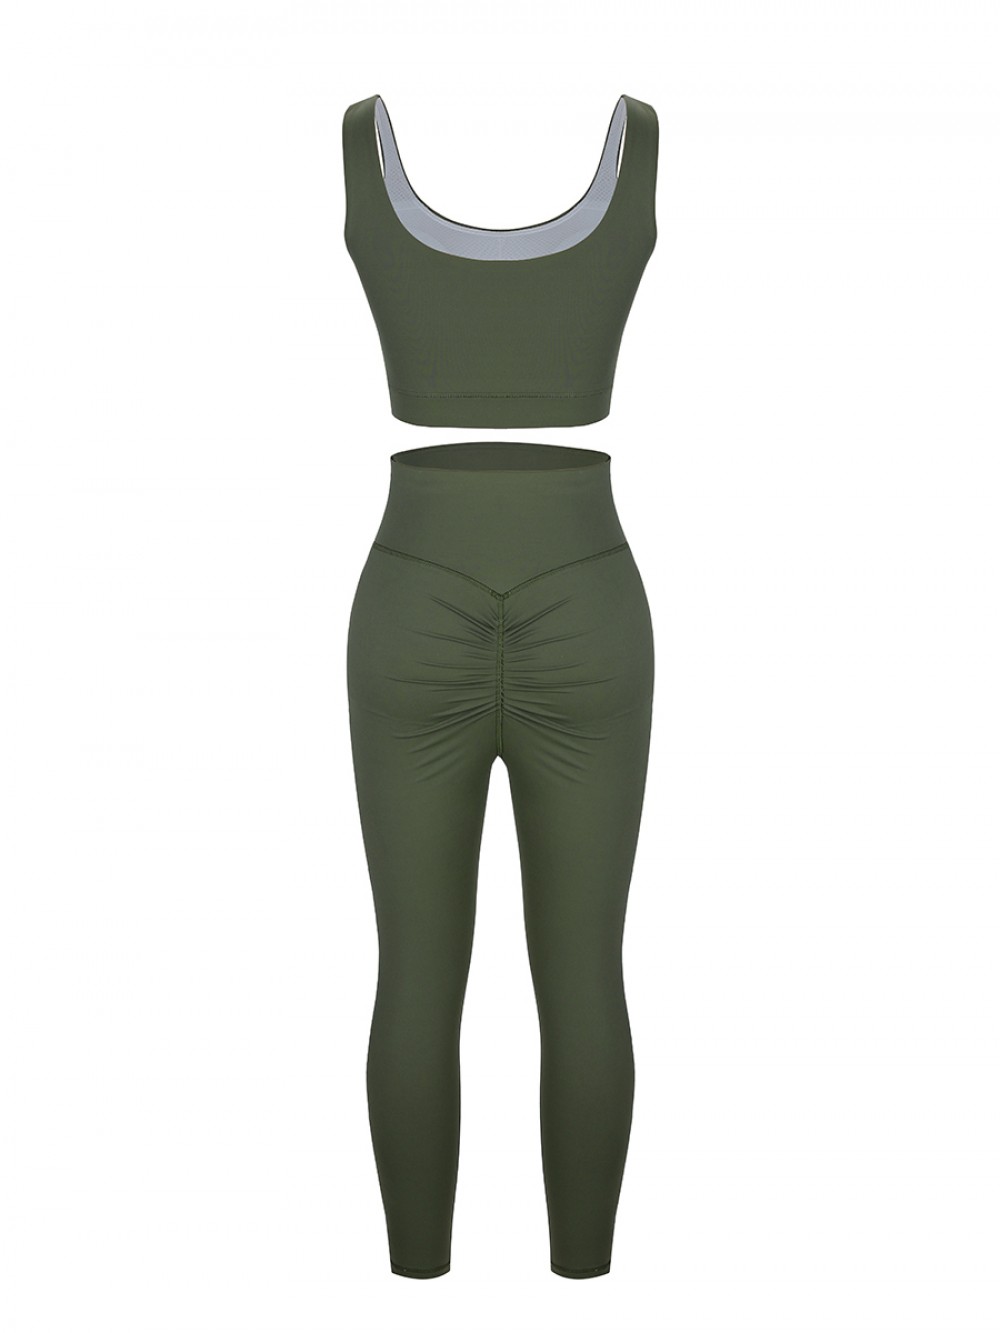 Army Green Hollow Out Full Length Pocket Athletic Suit Comfort